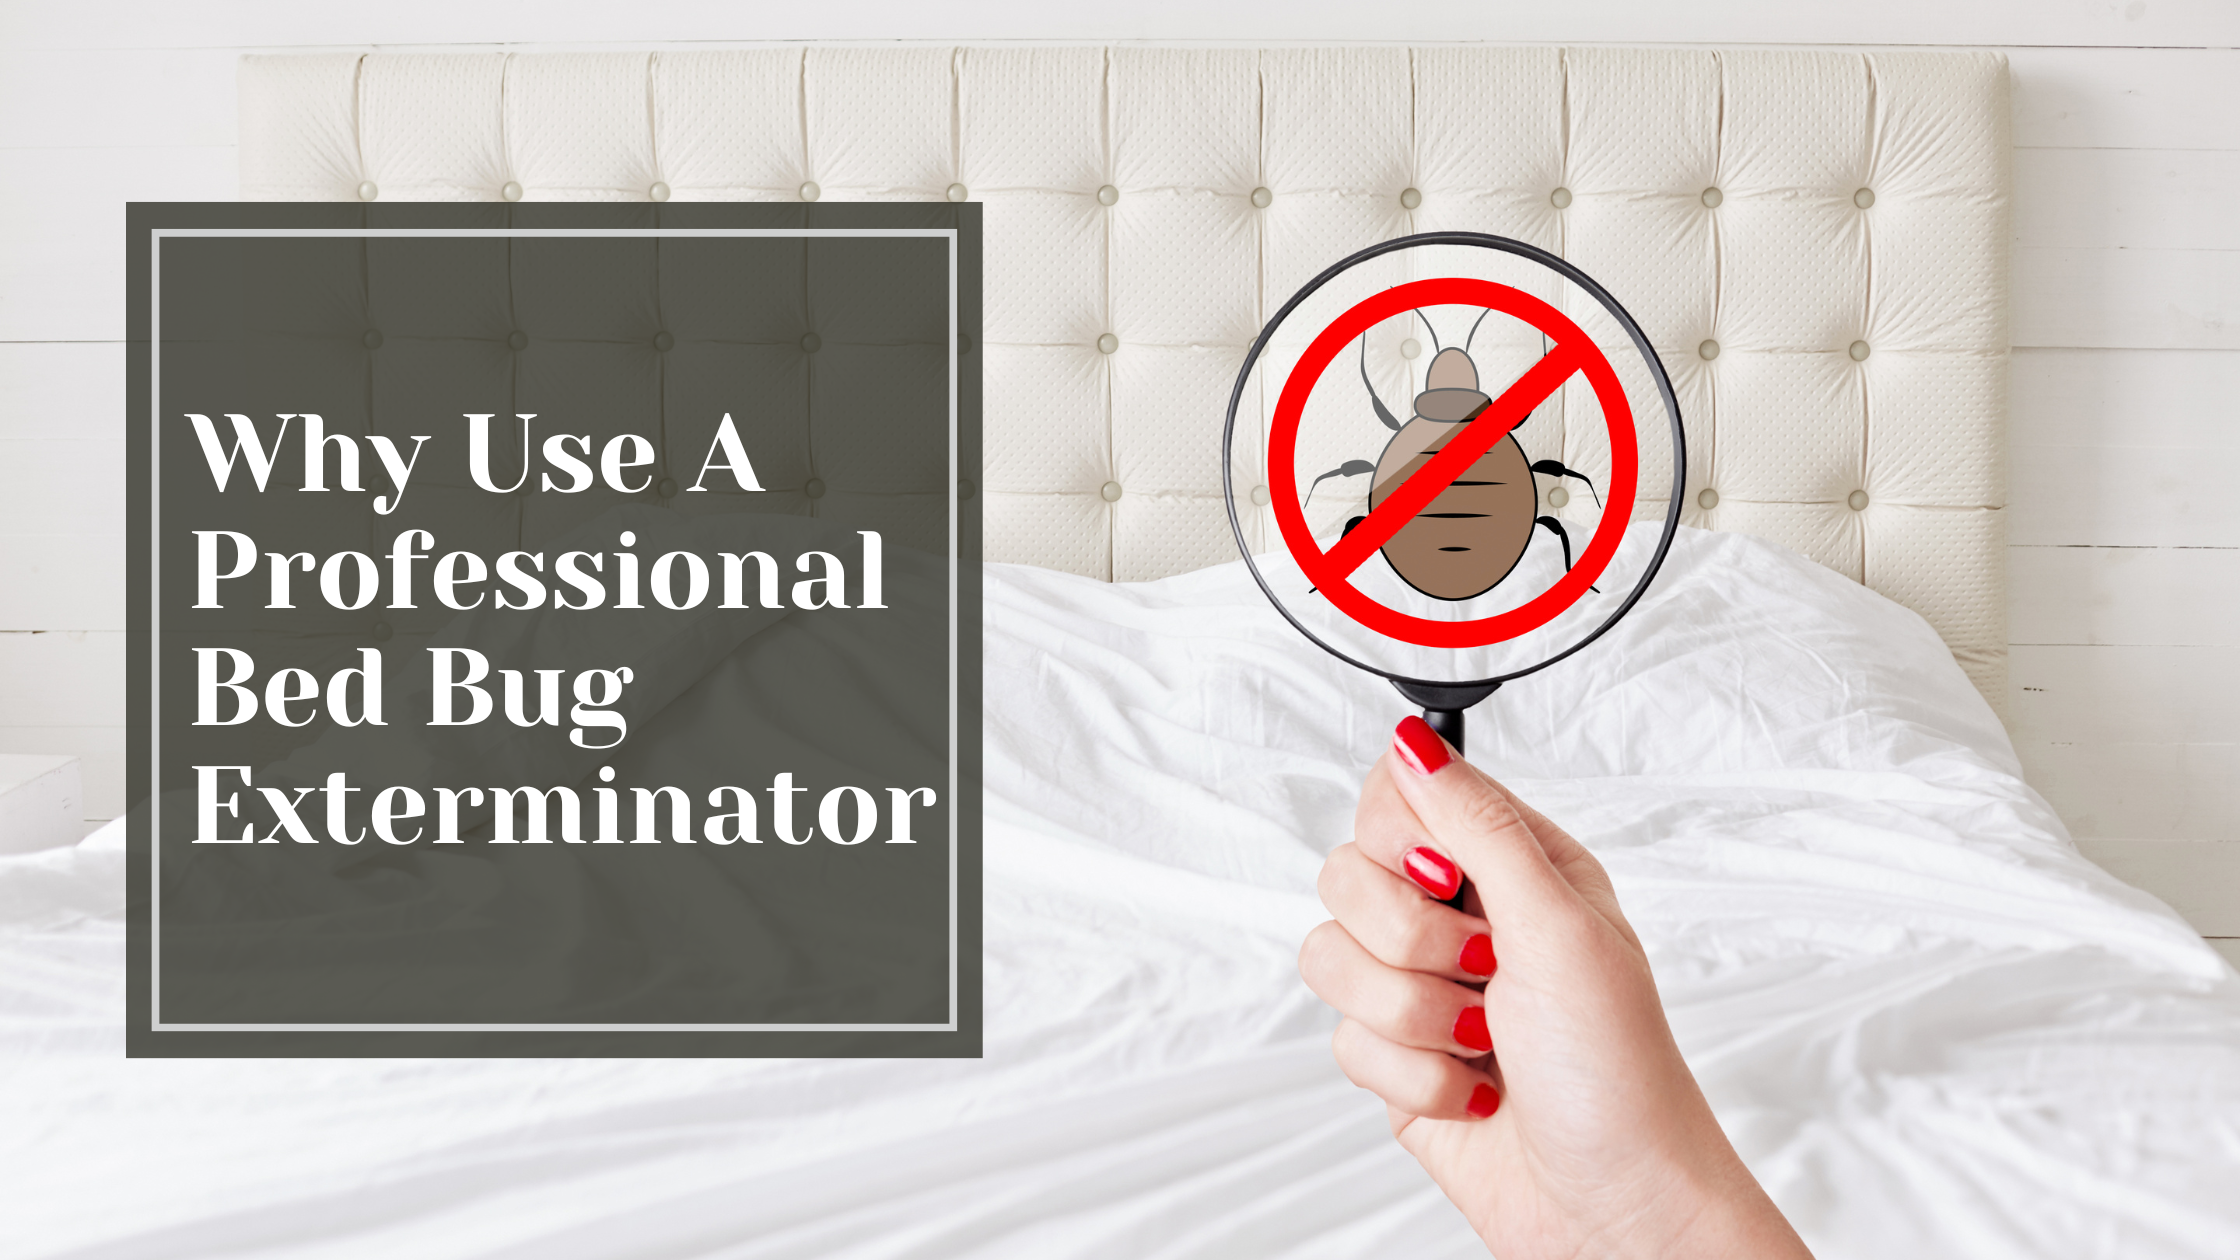 Why Use A Professional Bed Bug Exterminator